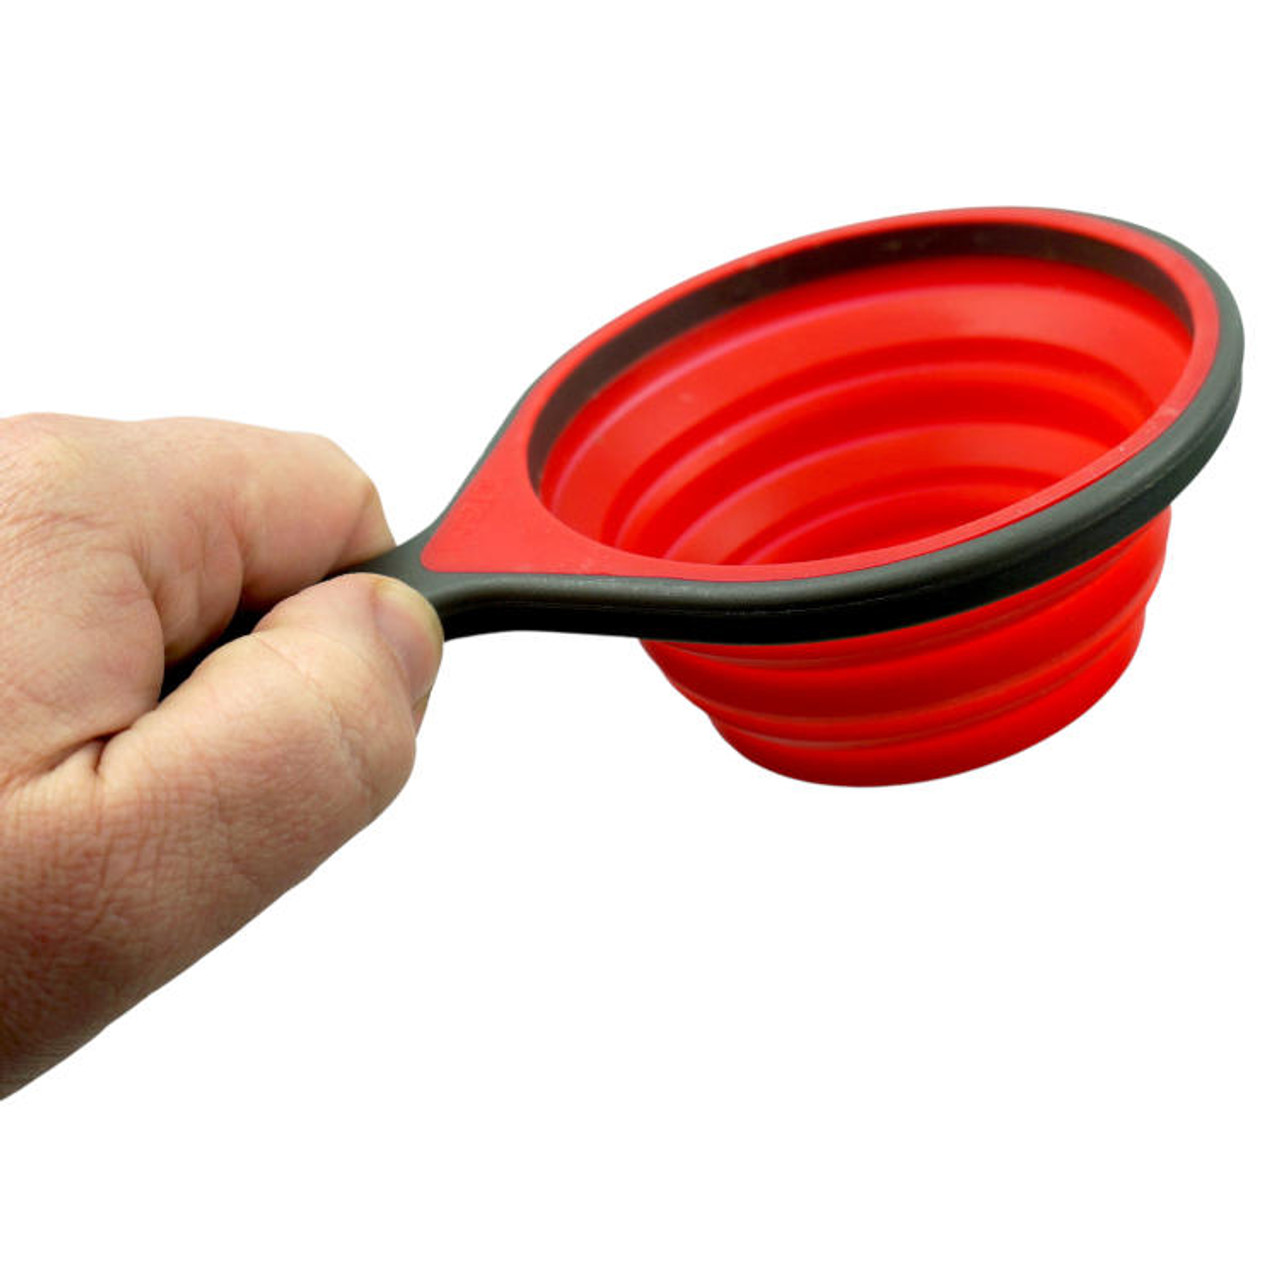 COLLAPSING MEASURING CUPS